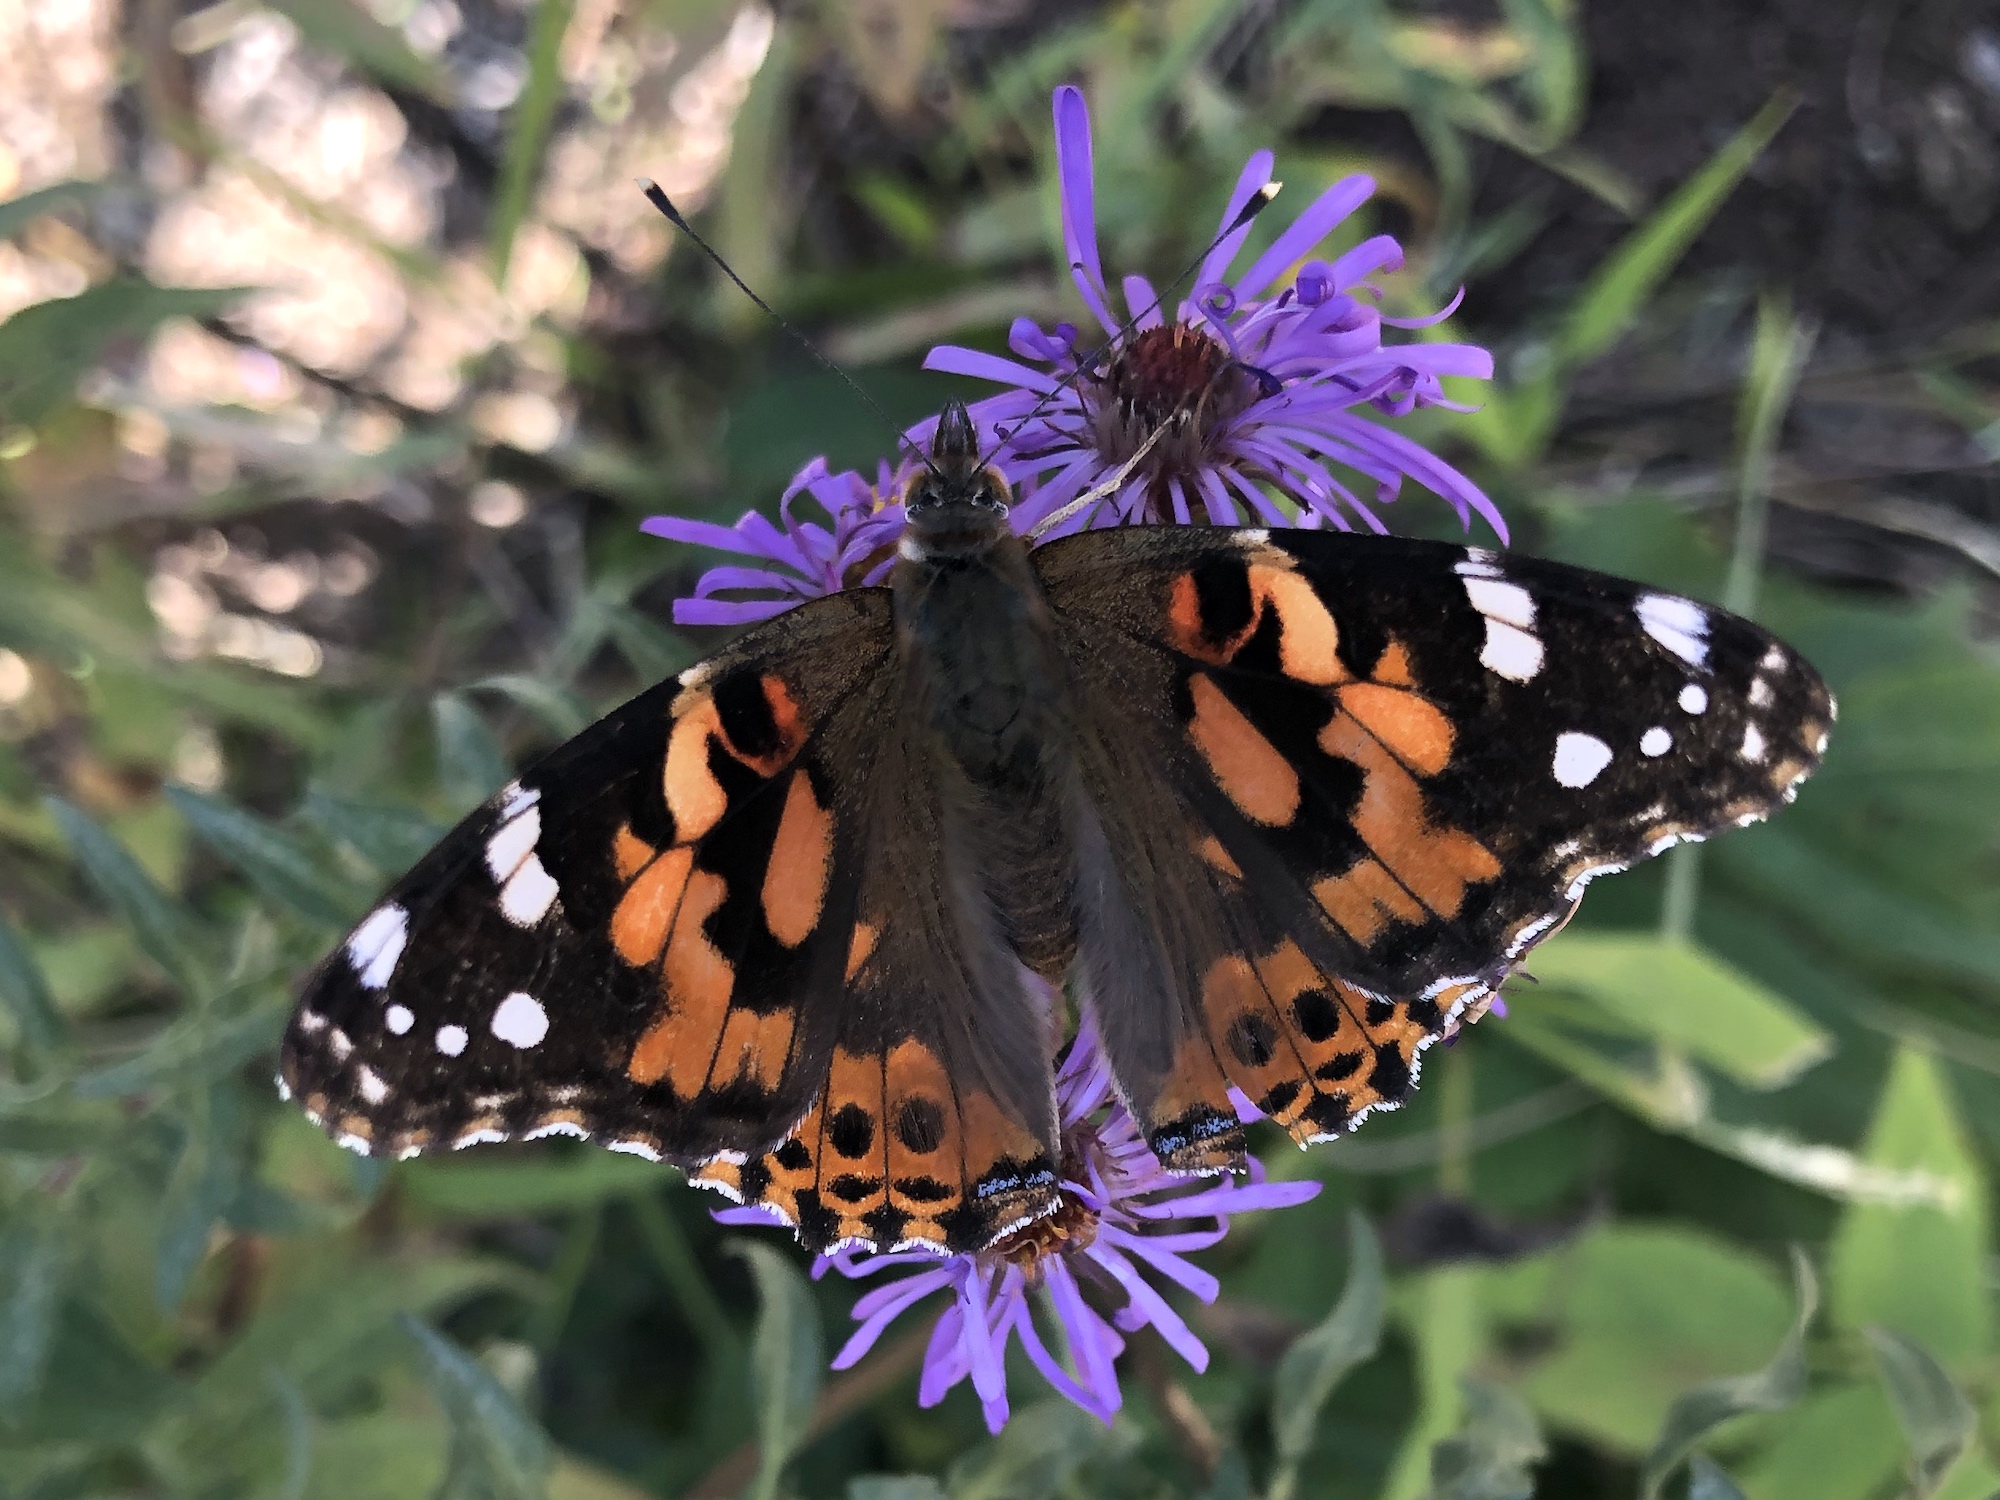 Painted Lady Butterfly on New England Aster in the Thoreau Rain Garden in Madison, Wisconsin on October 8, 2019.